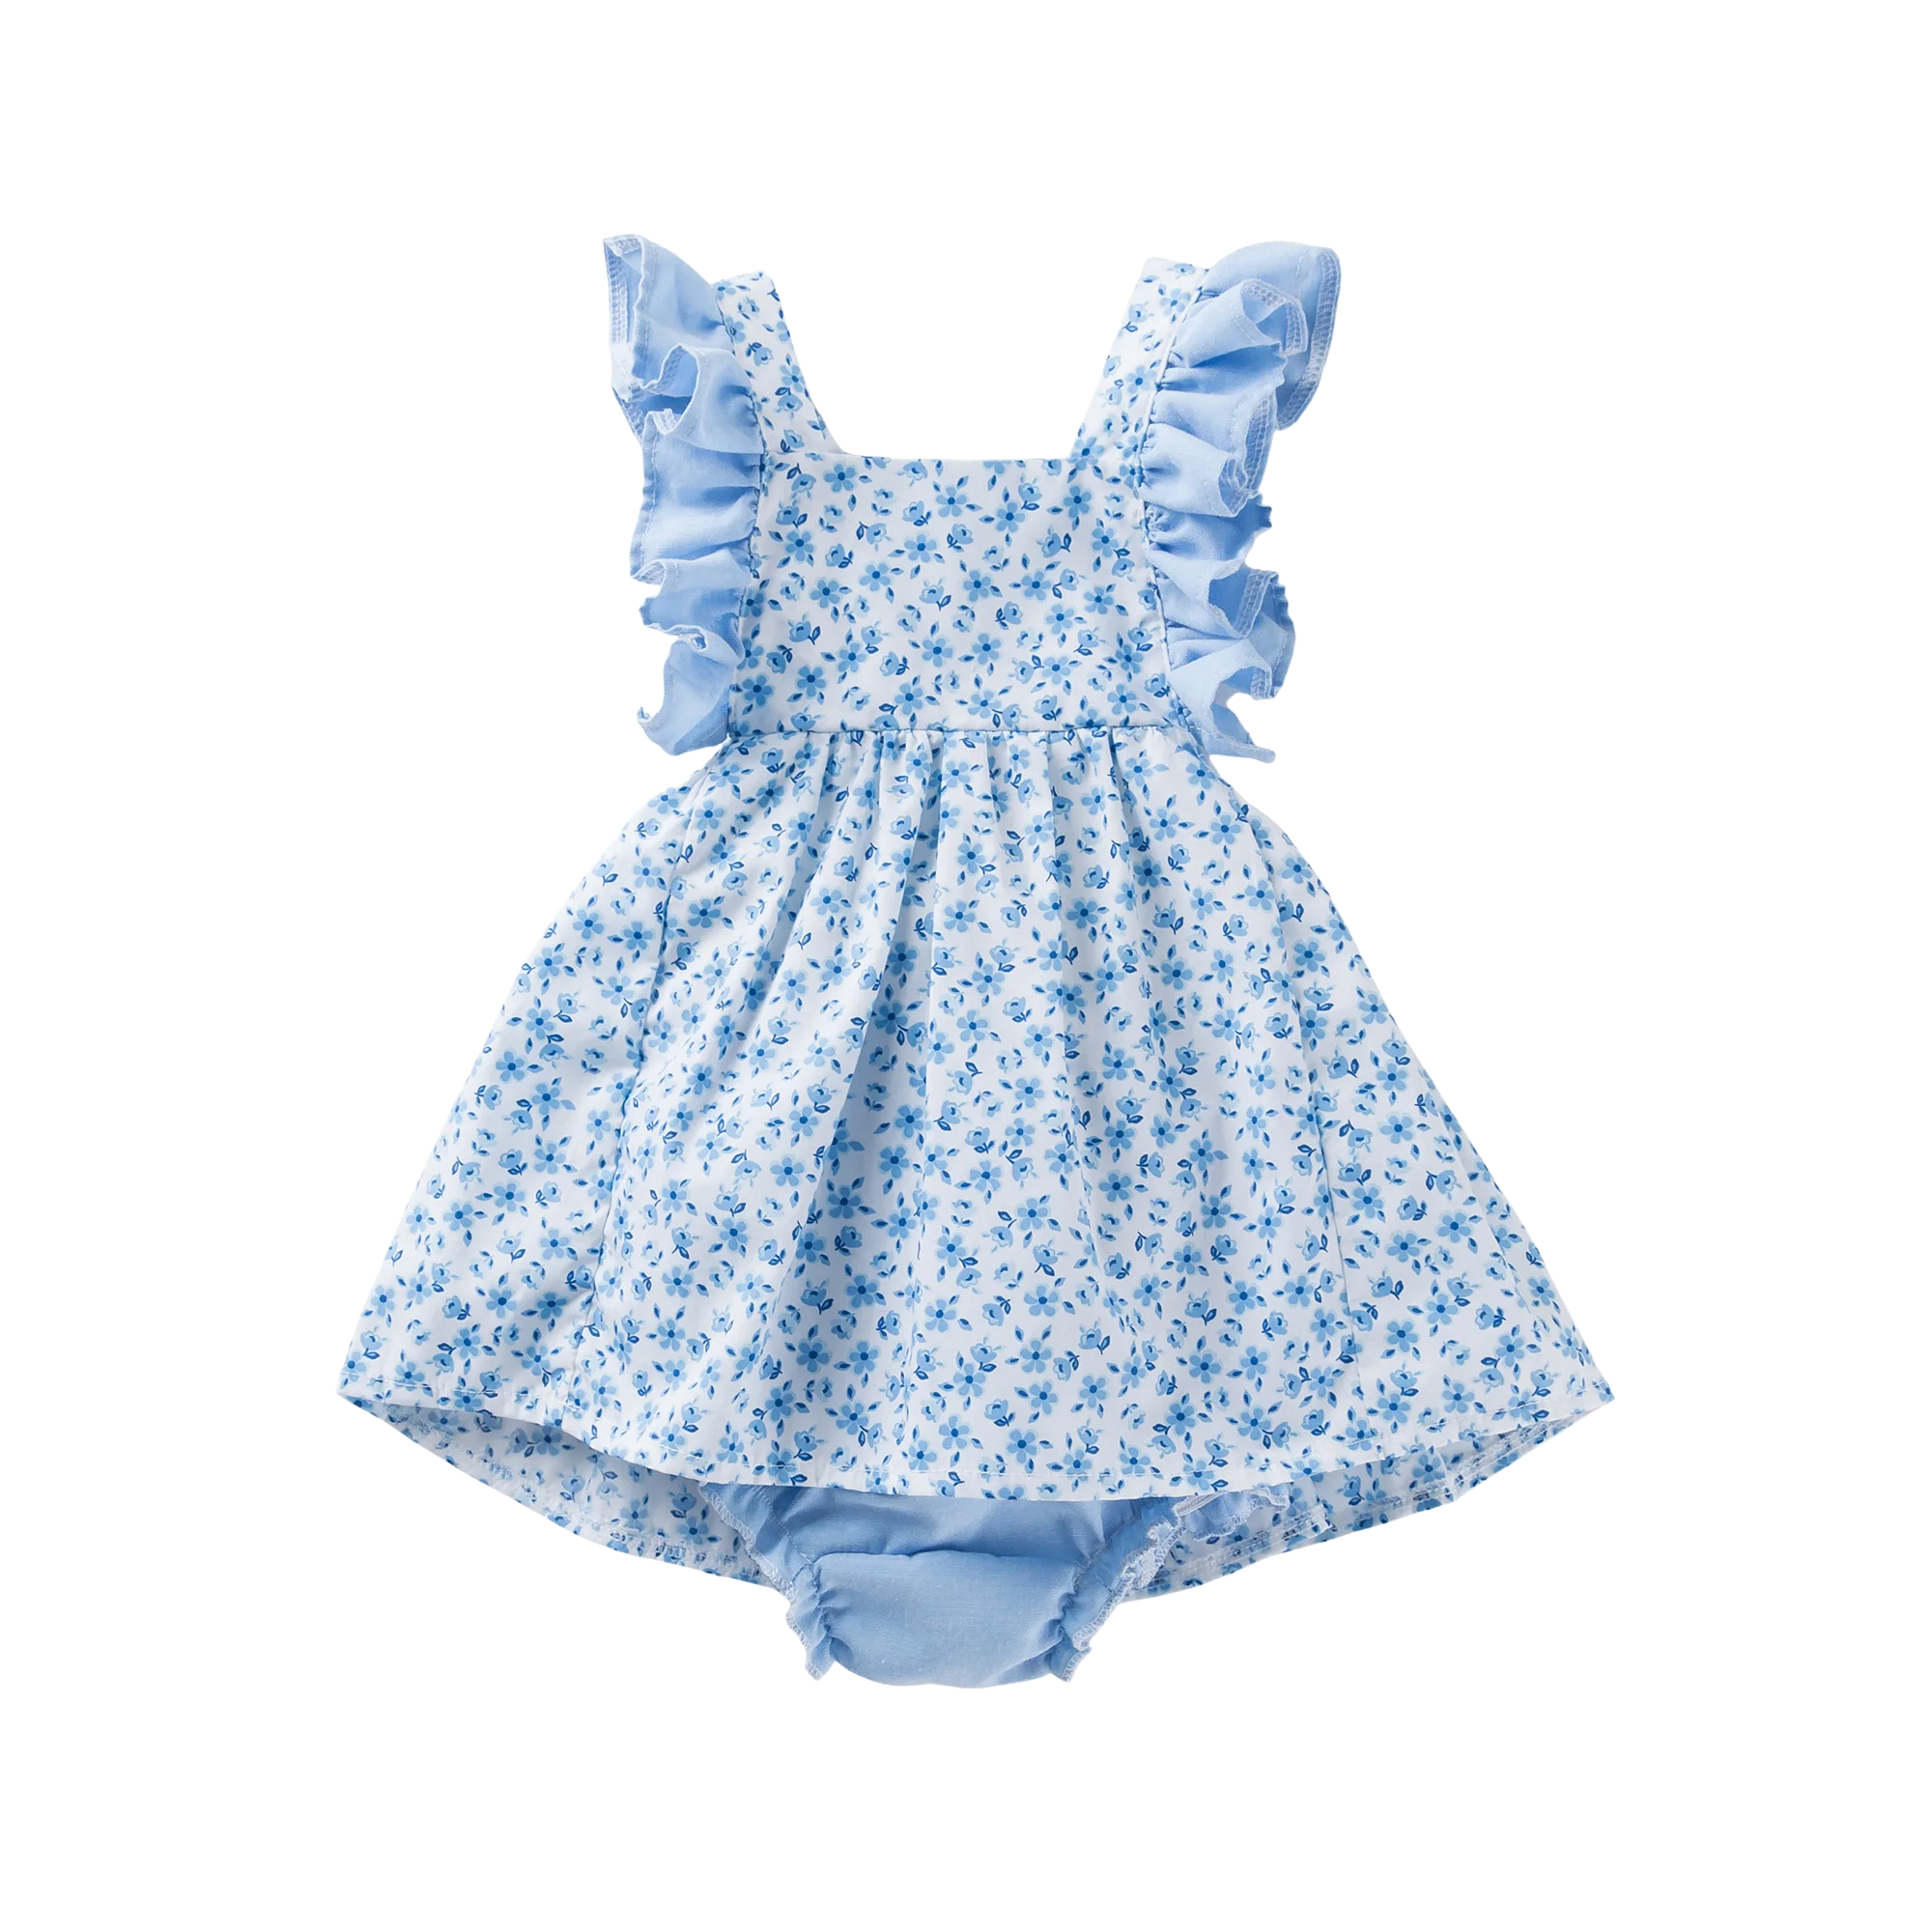 

Babany bebe Newborn Baby Floral Dress PP shorts Sets Summer Cotton Girls Outfits 2 Pcs, Picture shown